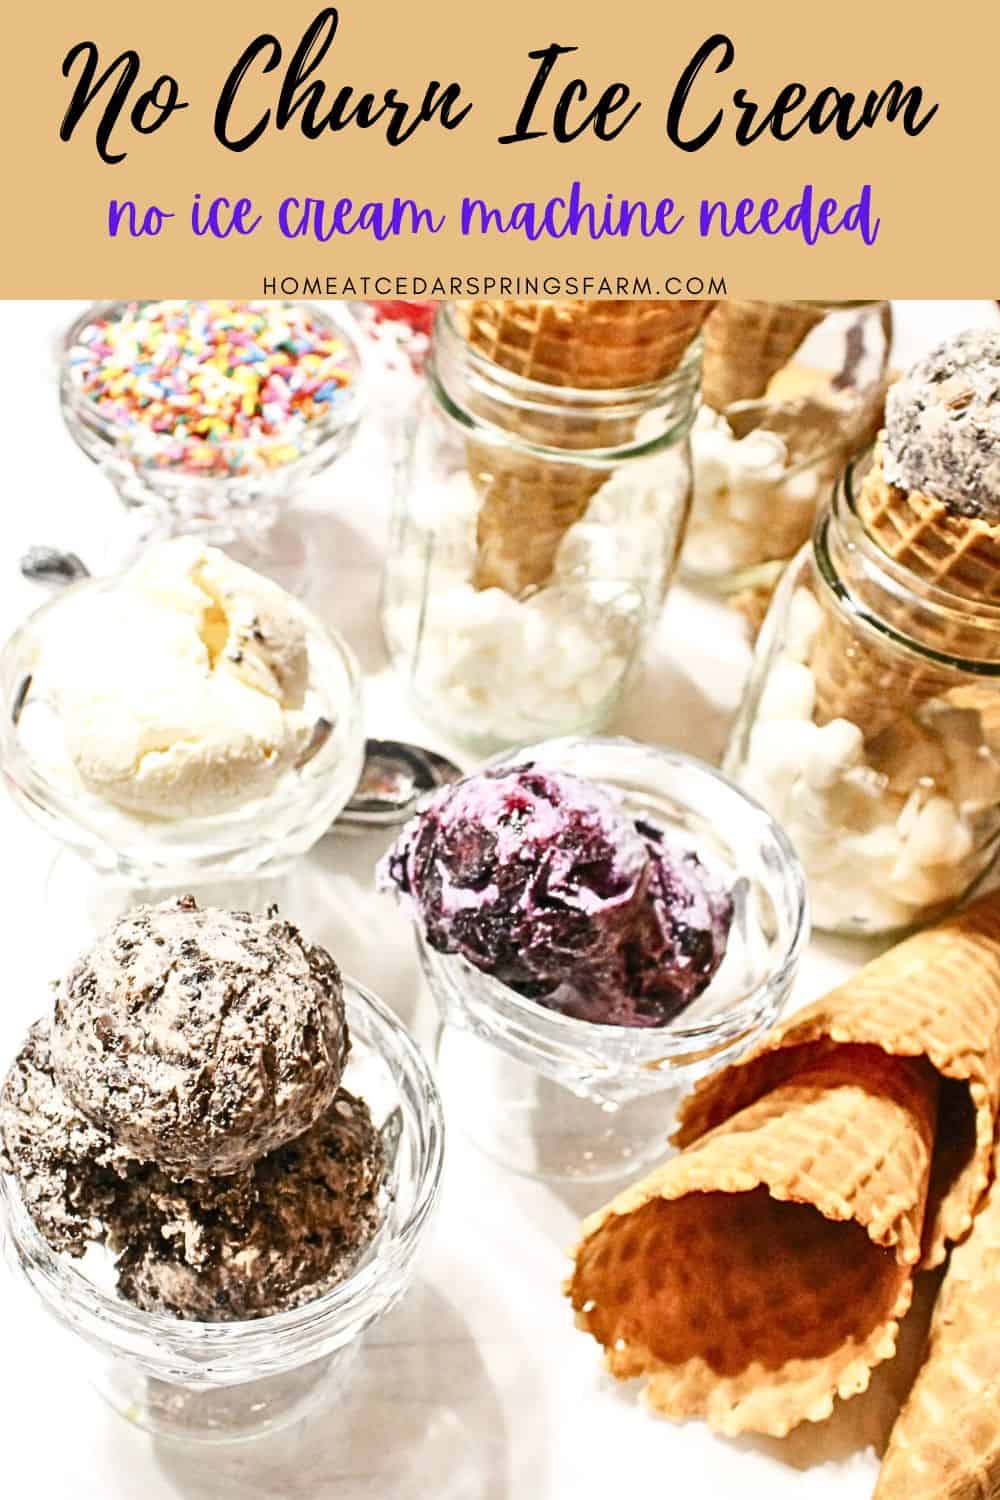 No Churn Oreo Ice Cream, vanilla, and blueberry. Pictured in waffle cones and bowls with text overlay.